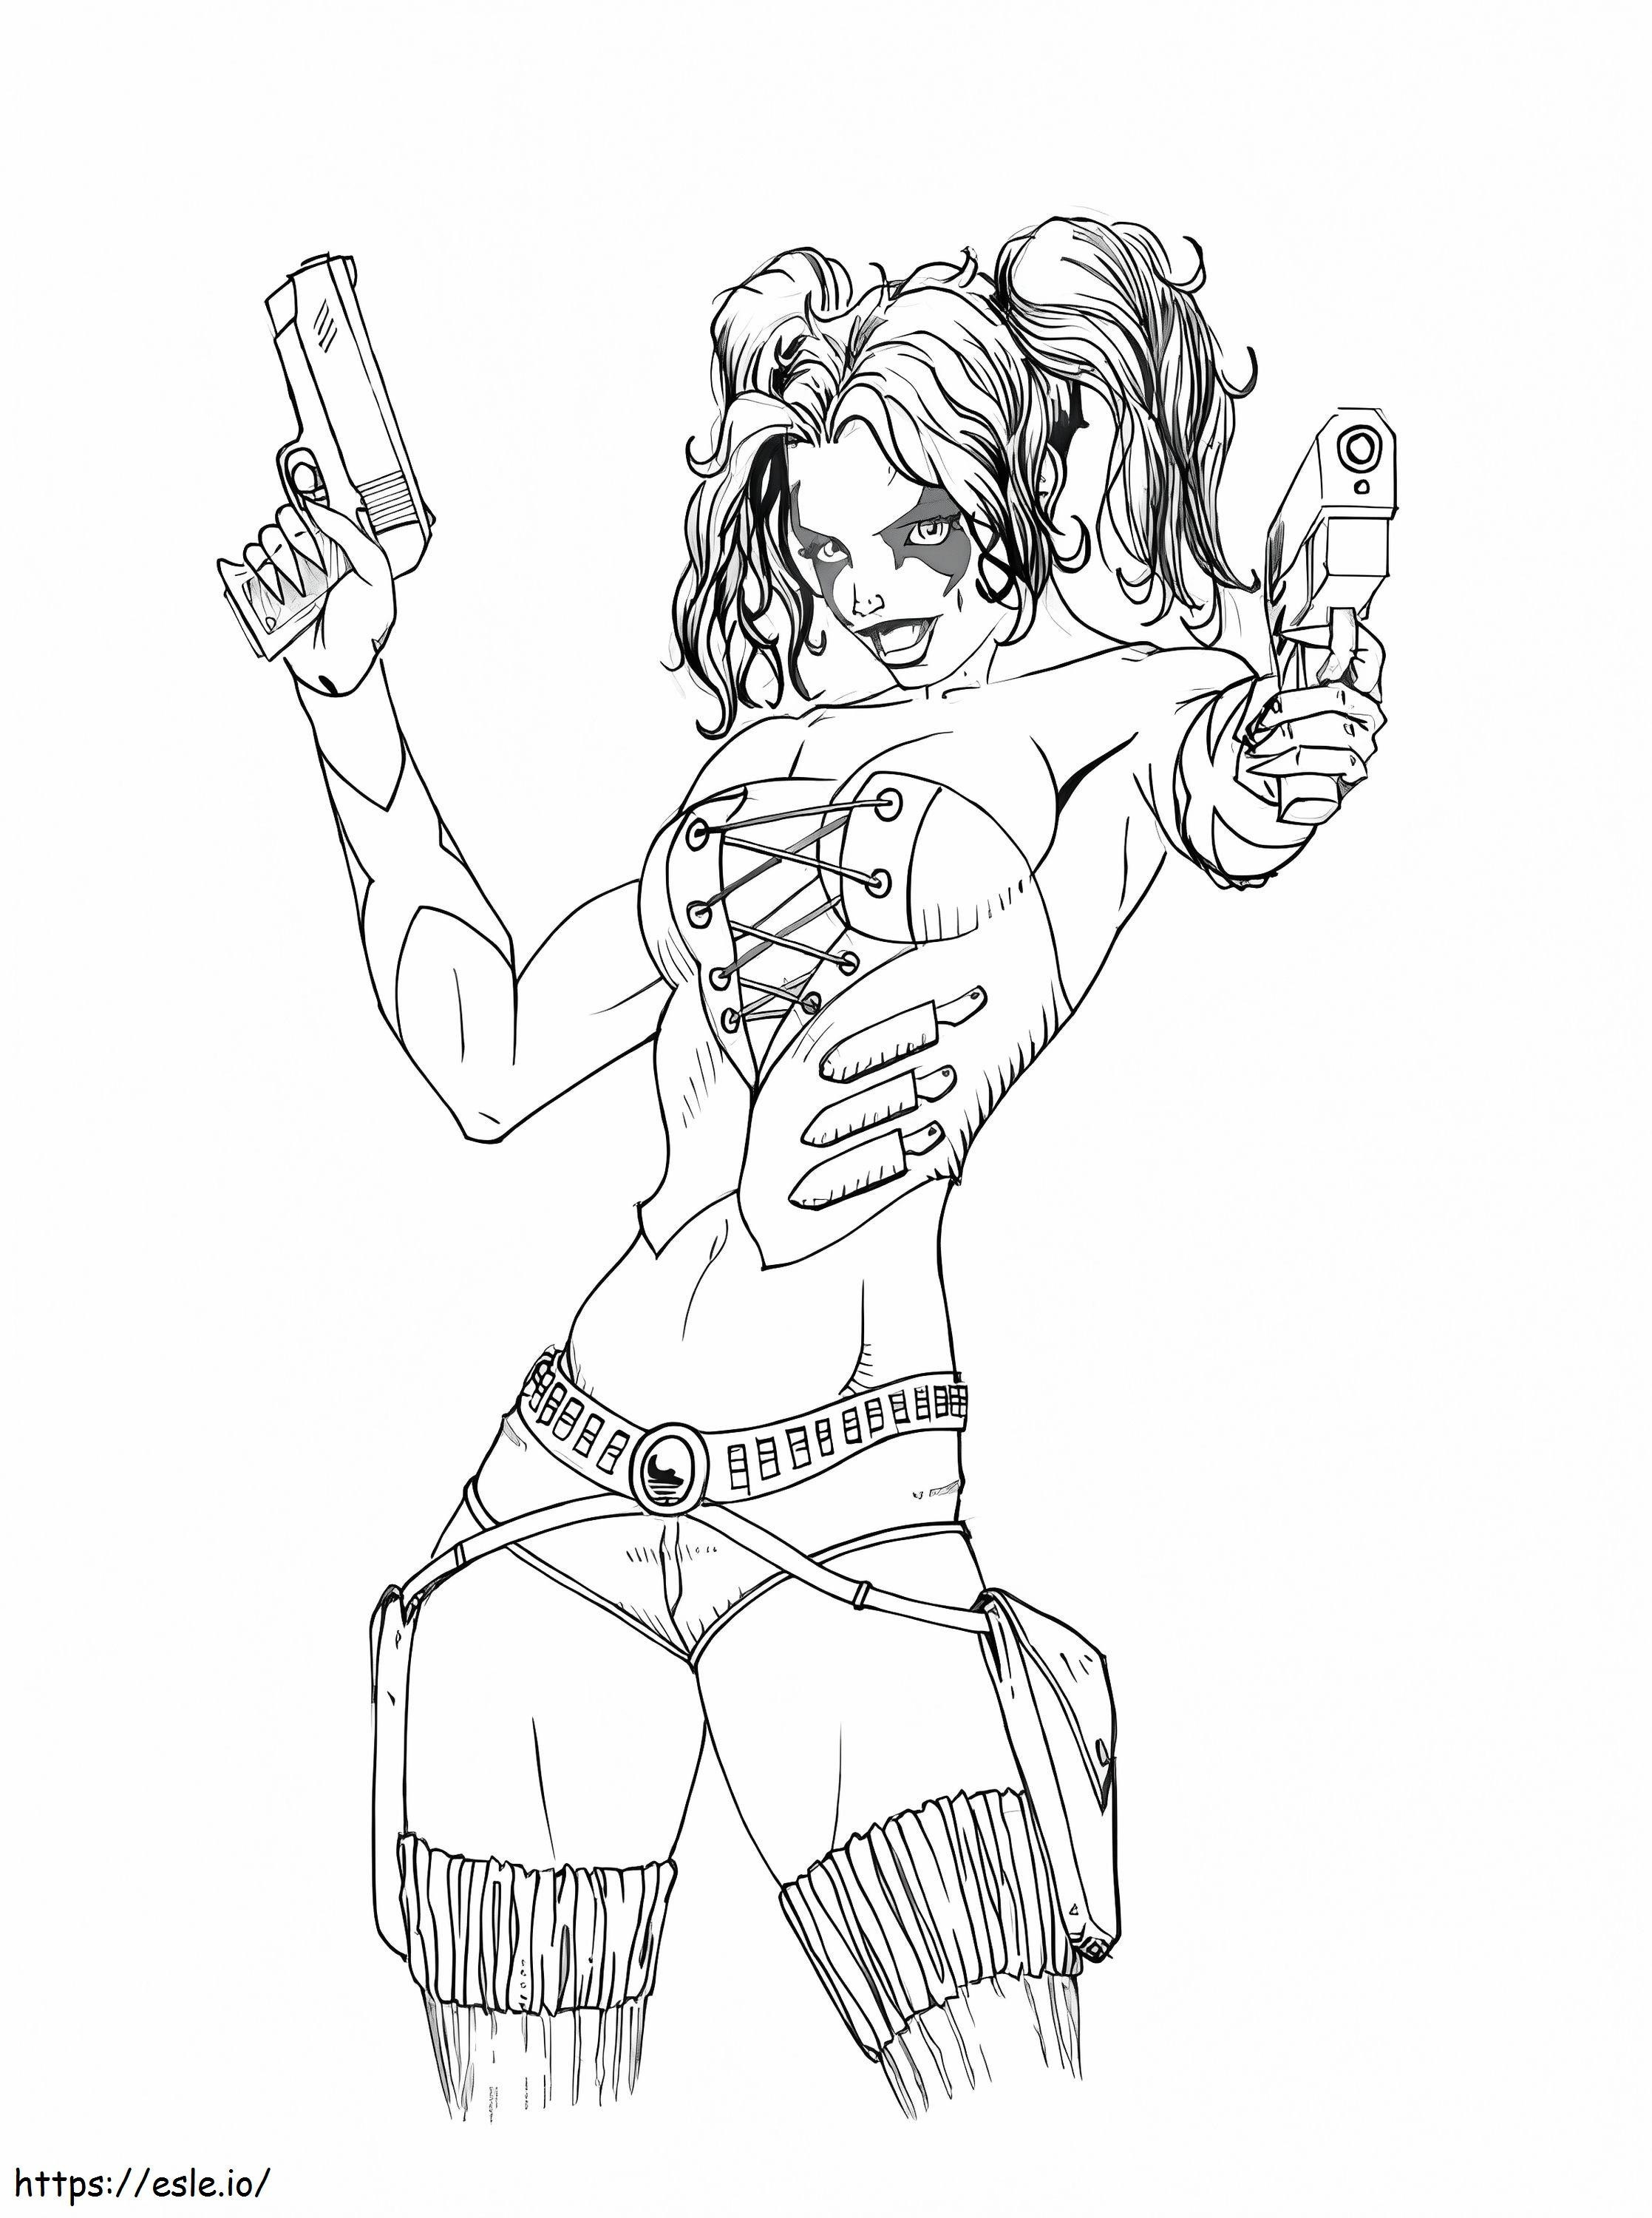 Awesome Harley Quinn coloring page